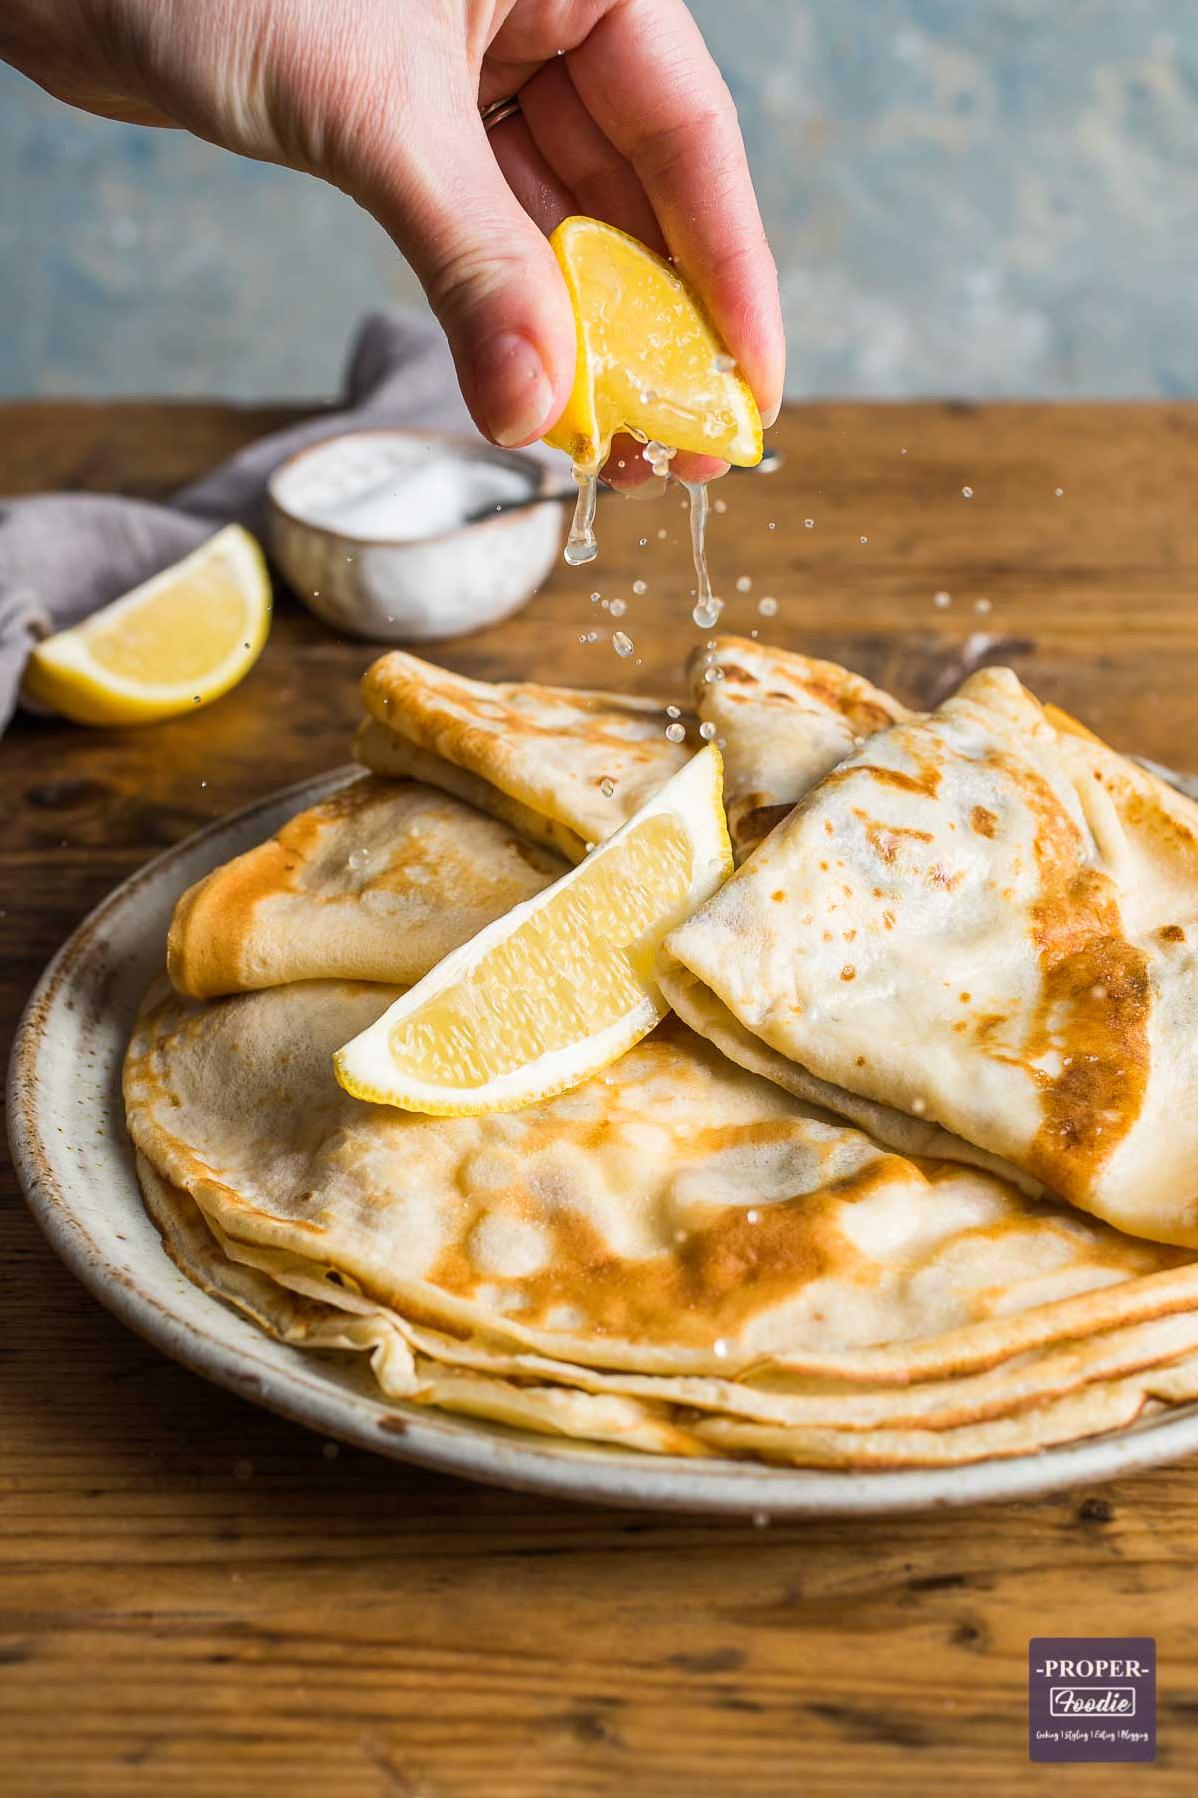  Sweet or savory, these pancakes can be enjoyed any way you like.